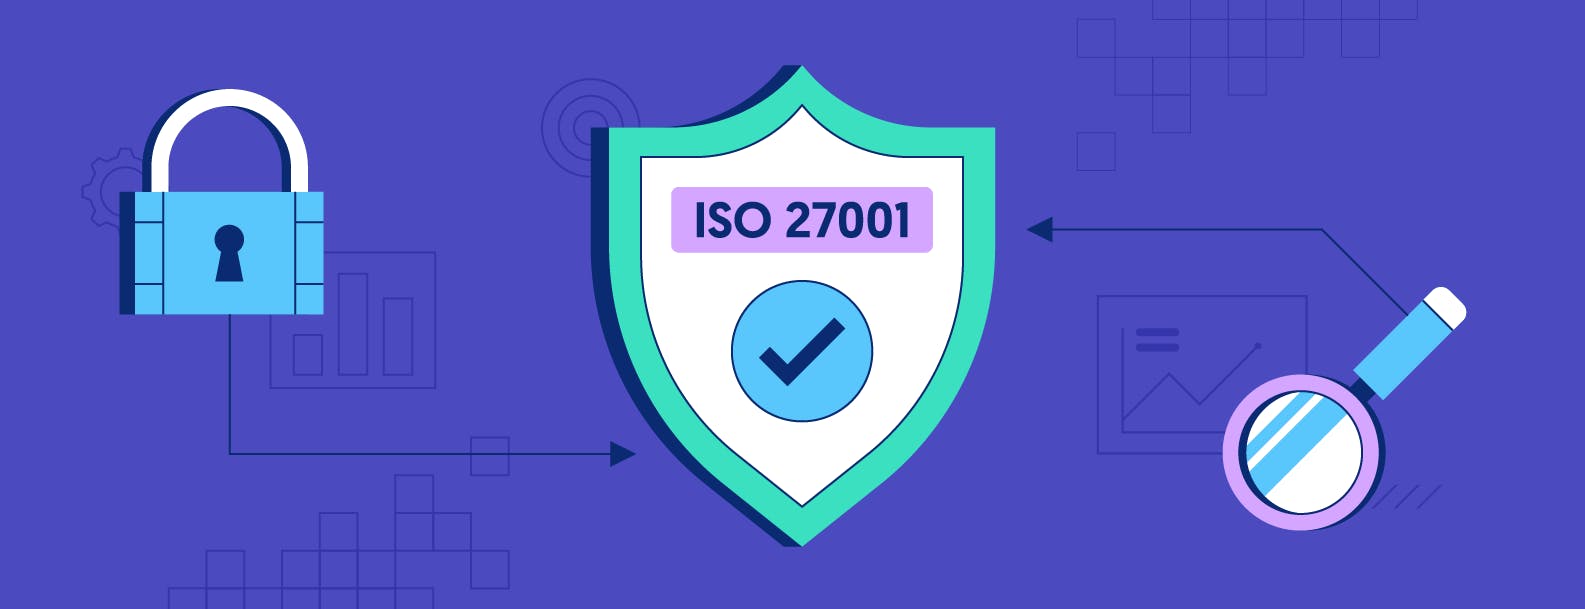 Everything You Need to Know About ISO 27001 Audits [+ Checklist]